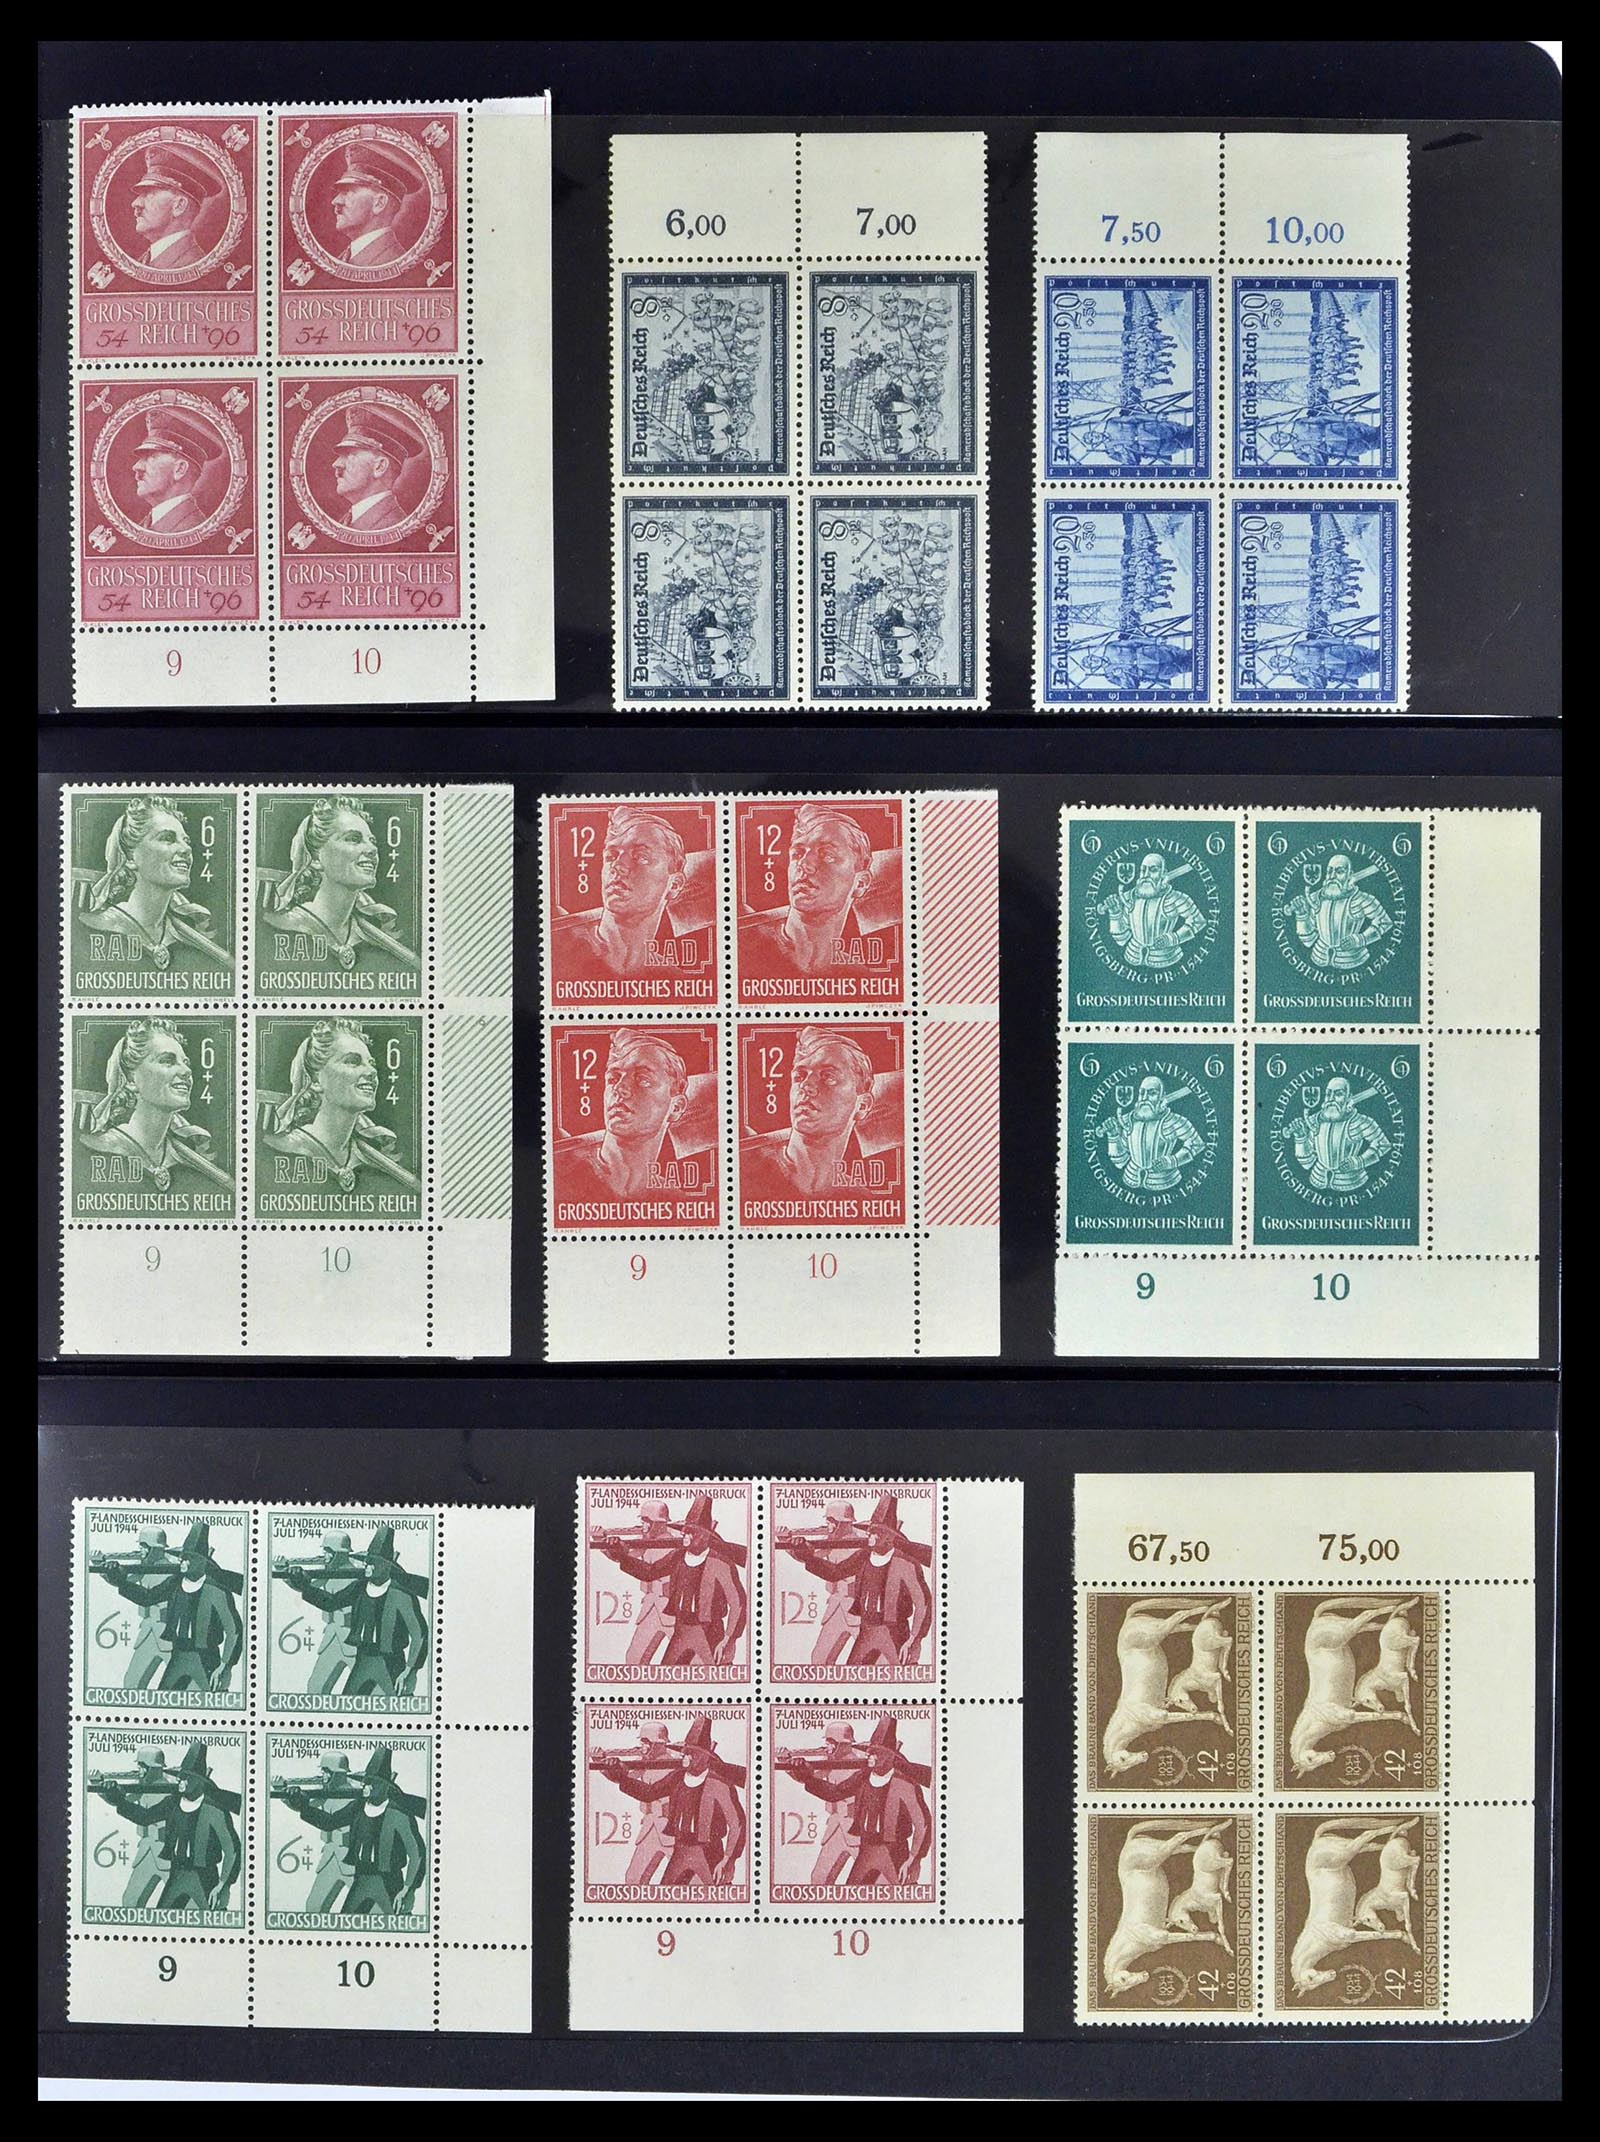 39255 0029 - Stamp collection 39255 German Reich MNH blocks of 4.